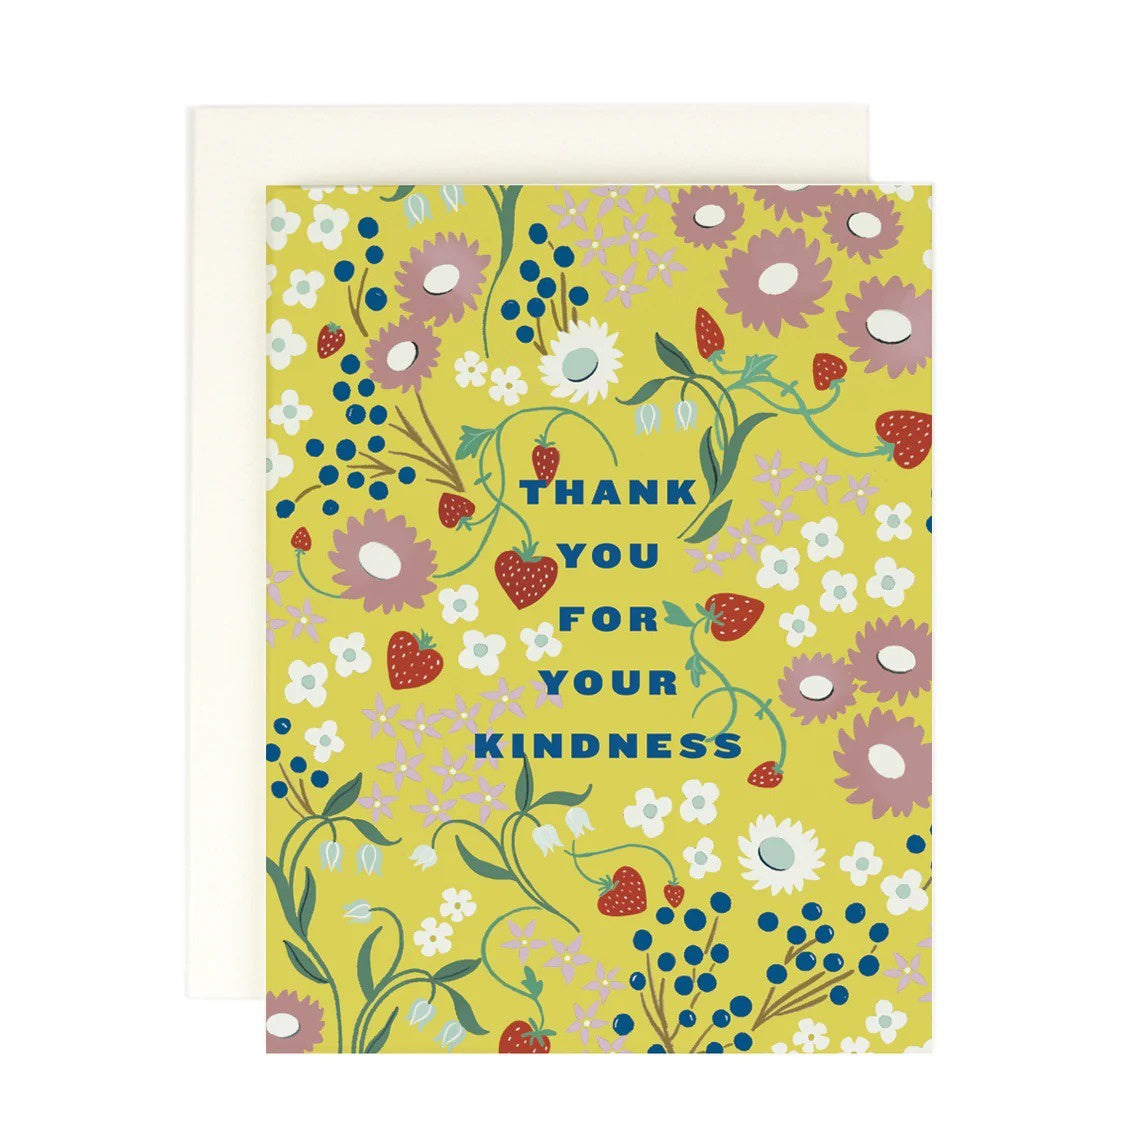 For Your Kindness Greeting Card